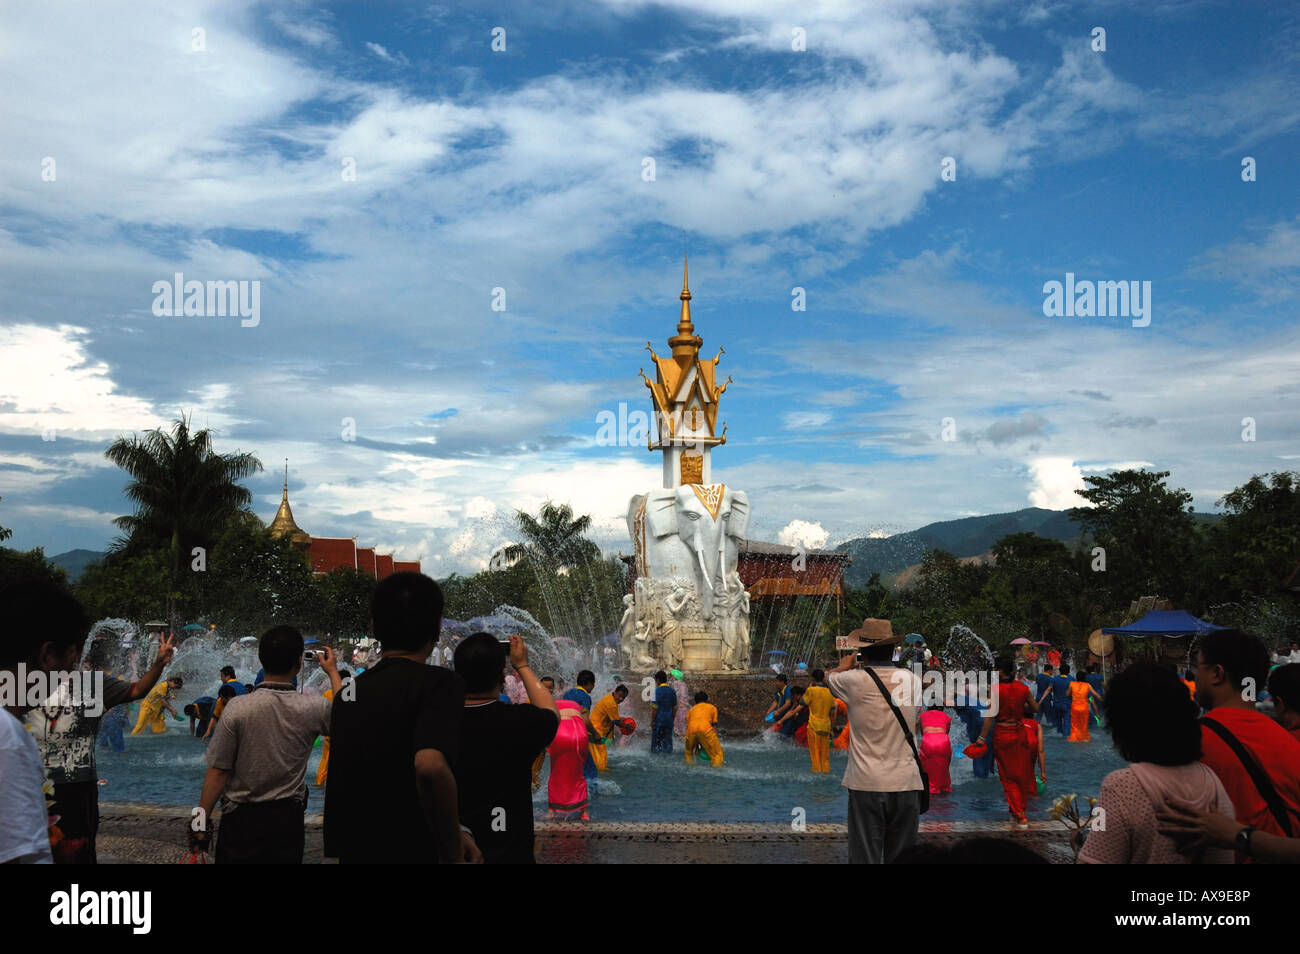 Festival in a Dai village, people splash water at each other for good luck. Xishuanbanna, Yunnan, China. Stock Photo